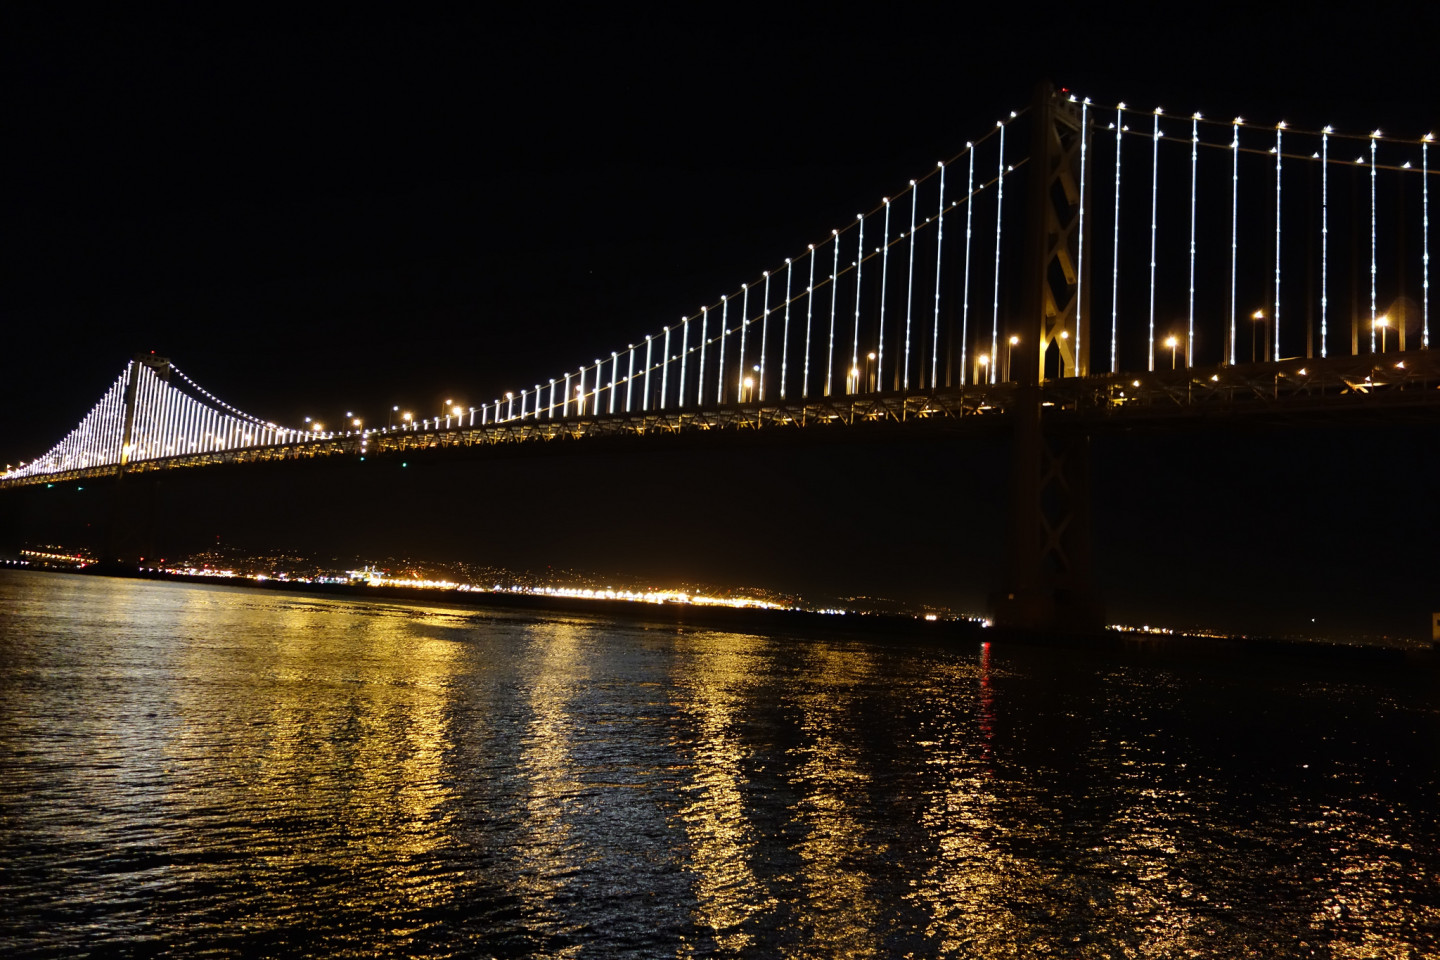 "I believe my work will allow people to see this iconic piece of infrastructure in a new way," artist Leo Villareal  told Bay Area Bites. (Steve Rhodes/Flickr)